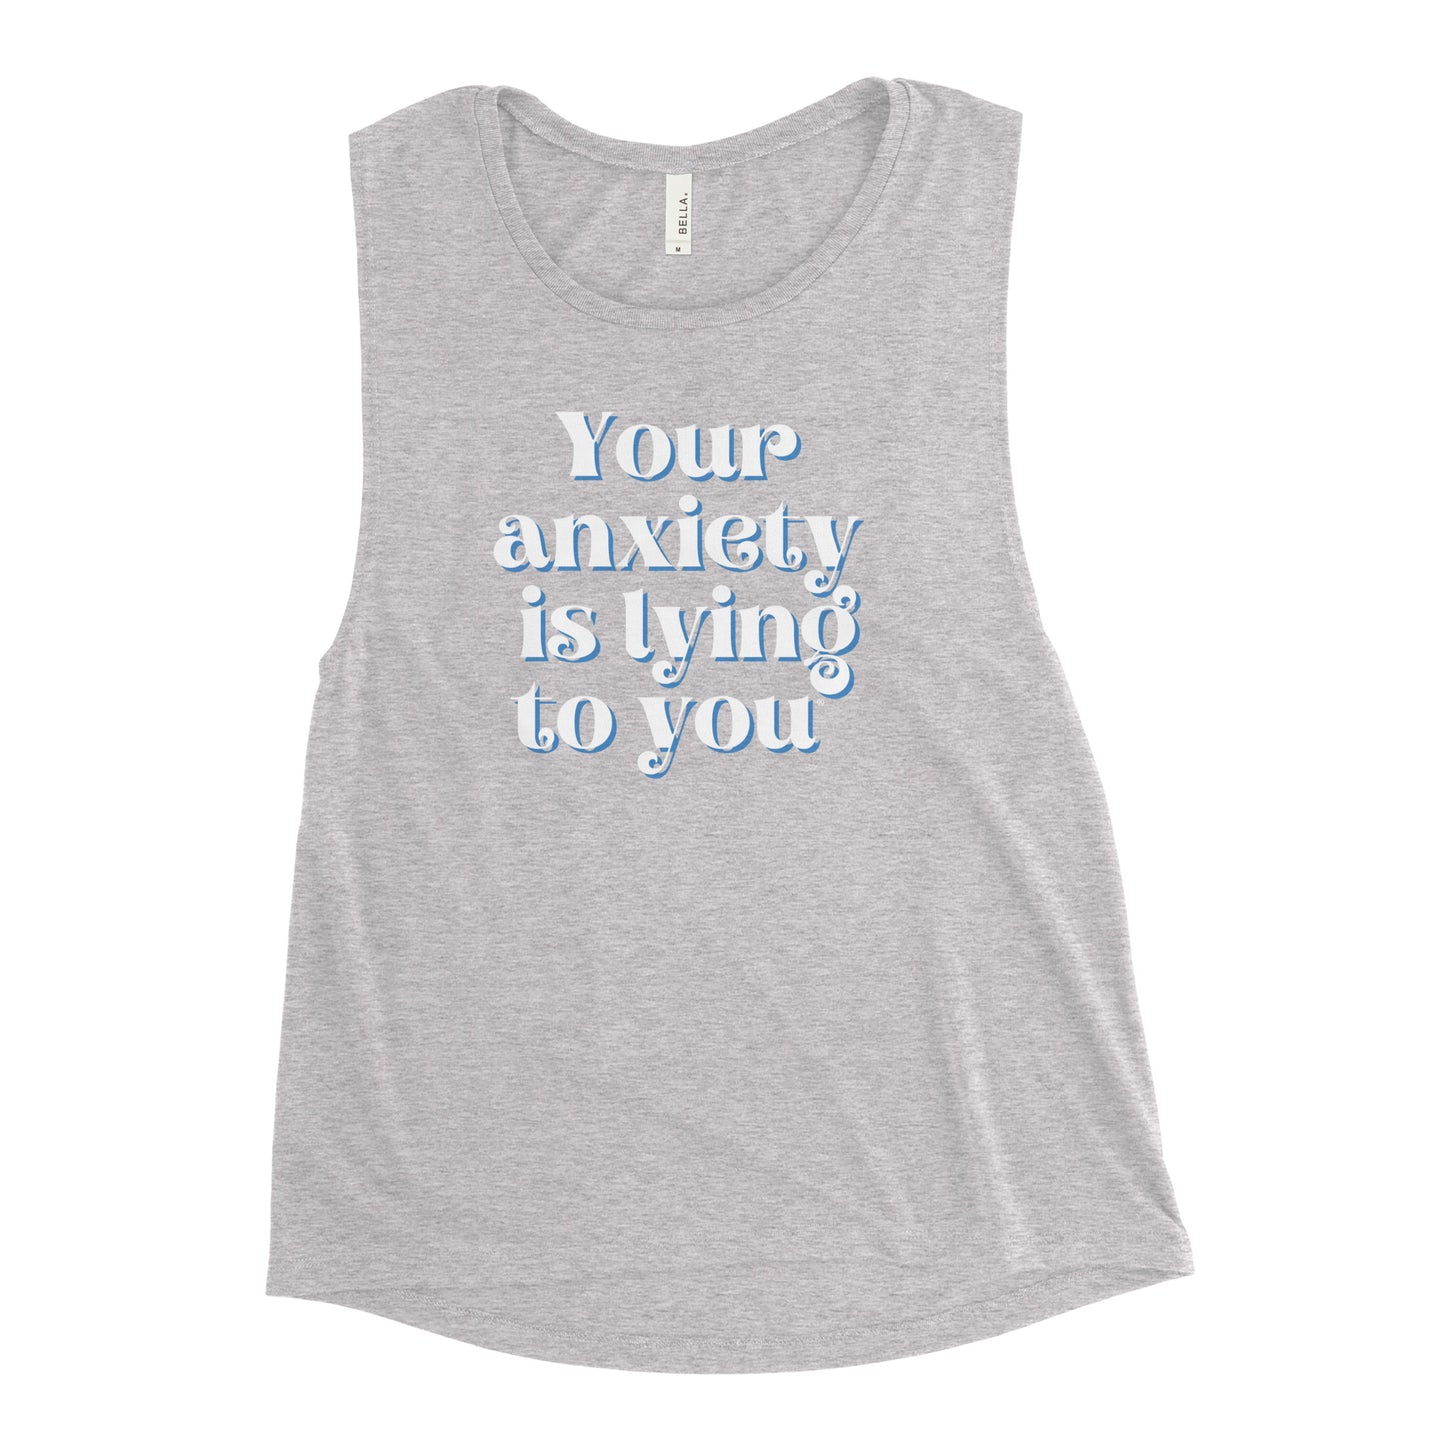 Your anxiety is lying to you® Ladies’ Muscle Tank